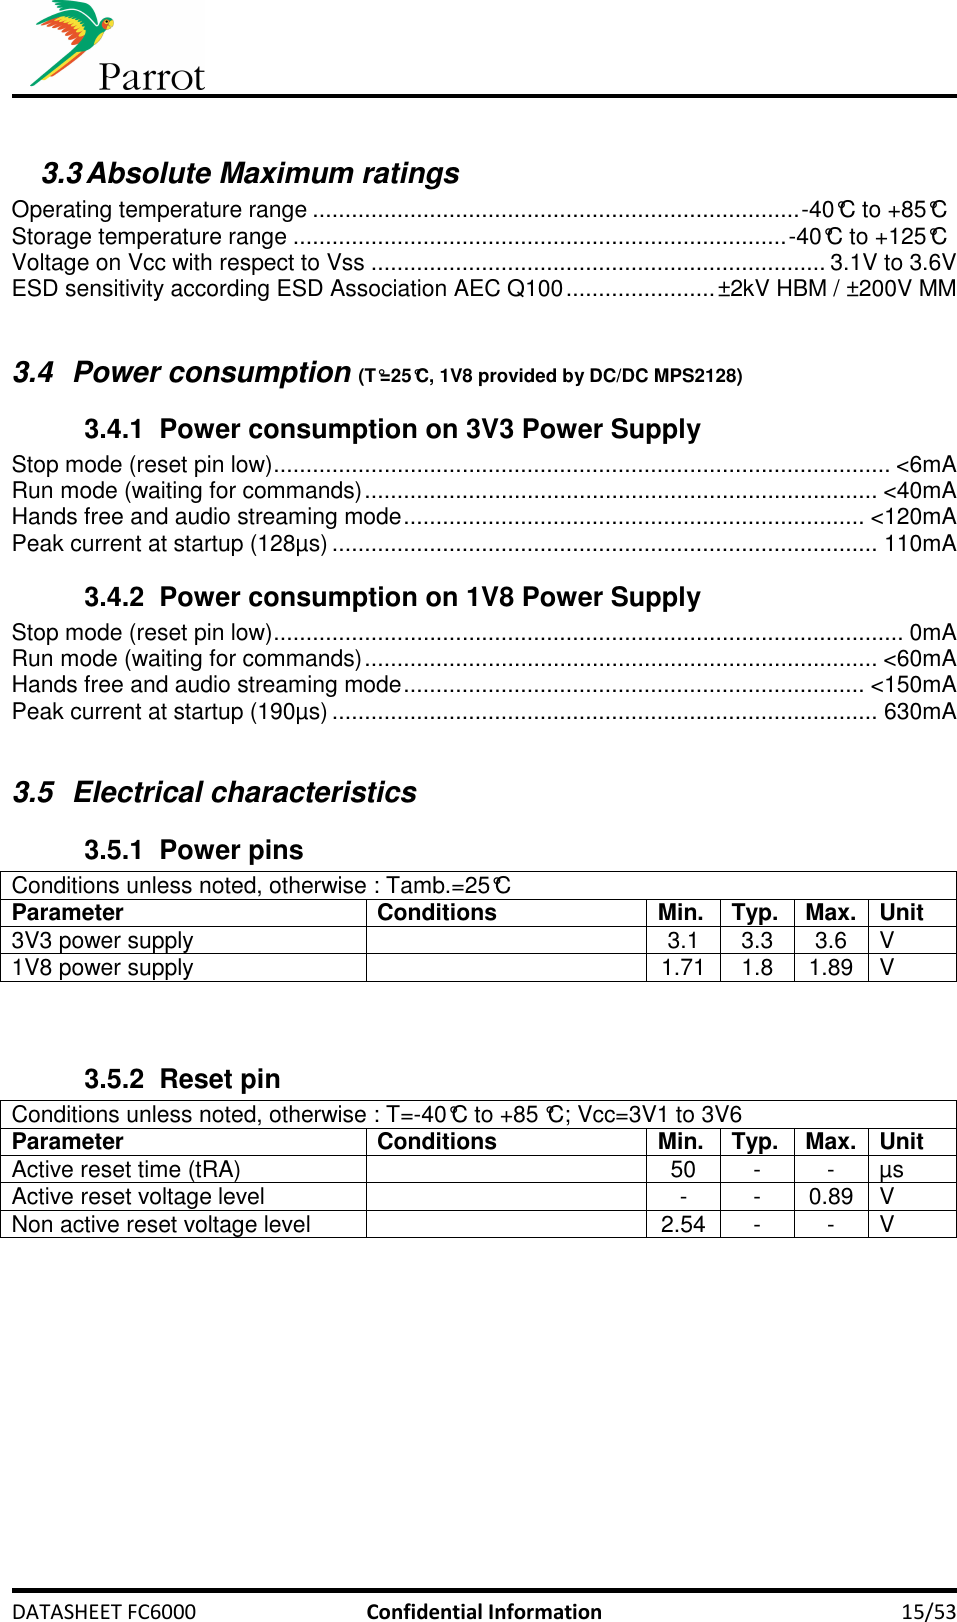     DATASHEET FC6000  Confidential Information  15/53  3.3 Absolute Maximum ratings  Operating temperature range ........................................................................... -40°C to +85°C Storage temperature range ............................................................................ -40°C to +125°C Voltage on Vcc with respect to Vss ...................................................................... 3.1V to 3.6V ESD sensitivity according ESD Association AEC Q100 ....................... ±2kV HBM / ±200V MM  3.4  Power consumption (T°=25°C, 1V8 provided by DC/DC MPS2128) 3.4.1  Power consumption on 3V3 Power Supply Stop mode (reset pin low) ............................................................................................... &lt;6mA Run mode (waiting for commands) ............................................................................... &lt;40mA Hands free and audio streaming mode ....................................................................... &lt;120mA Peak current at startup (128µs) .................................................................................... 110mA 3.4.2  Power consumption on 1V8 Power Supply Stop mode (reset pin low) ................................................................................................. 0mA Run mode (waiting for commands) ............................................................................... &lt;60mA Hands free and audio streaming mode ....................................................................... &lt;150mA Peak current at startup (190µs) .................................................................................... 630mA  3.5  Electrical characteristics 3.5.1  Power pins Conditions unless noted, otherwise : Tamb.=25°C Parameter Conditions Min. Typ. Max. Unit 3V3 power supply    3.1  3.3  3.6  V 1V8 power supply    1.71  1.8  1.89  V   3.5.2  Reset pin Conditions unless noted, otherwise : T=-40°C to +85 °C; Vcc=3V1 to 3V6 Parameter Conditions Min. Typ. Max. Unit Active reset time (tRA)    50  -  -  µs Active reset voltage level    -  -  0.89  V Non active reset voltage level    2.54  -  -  V  